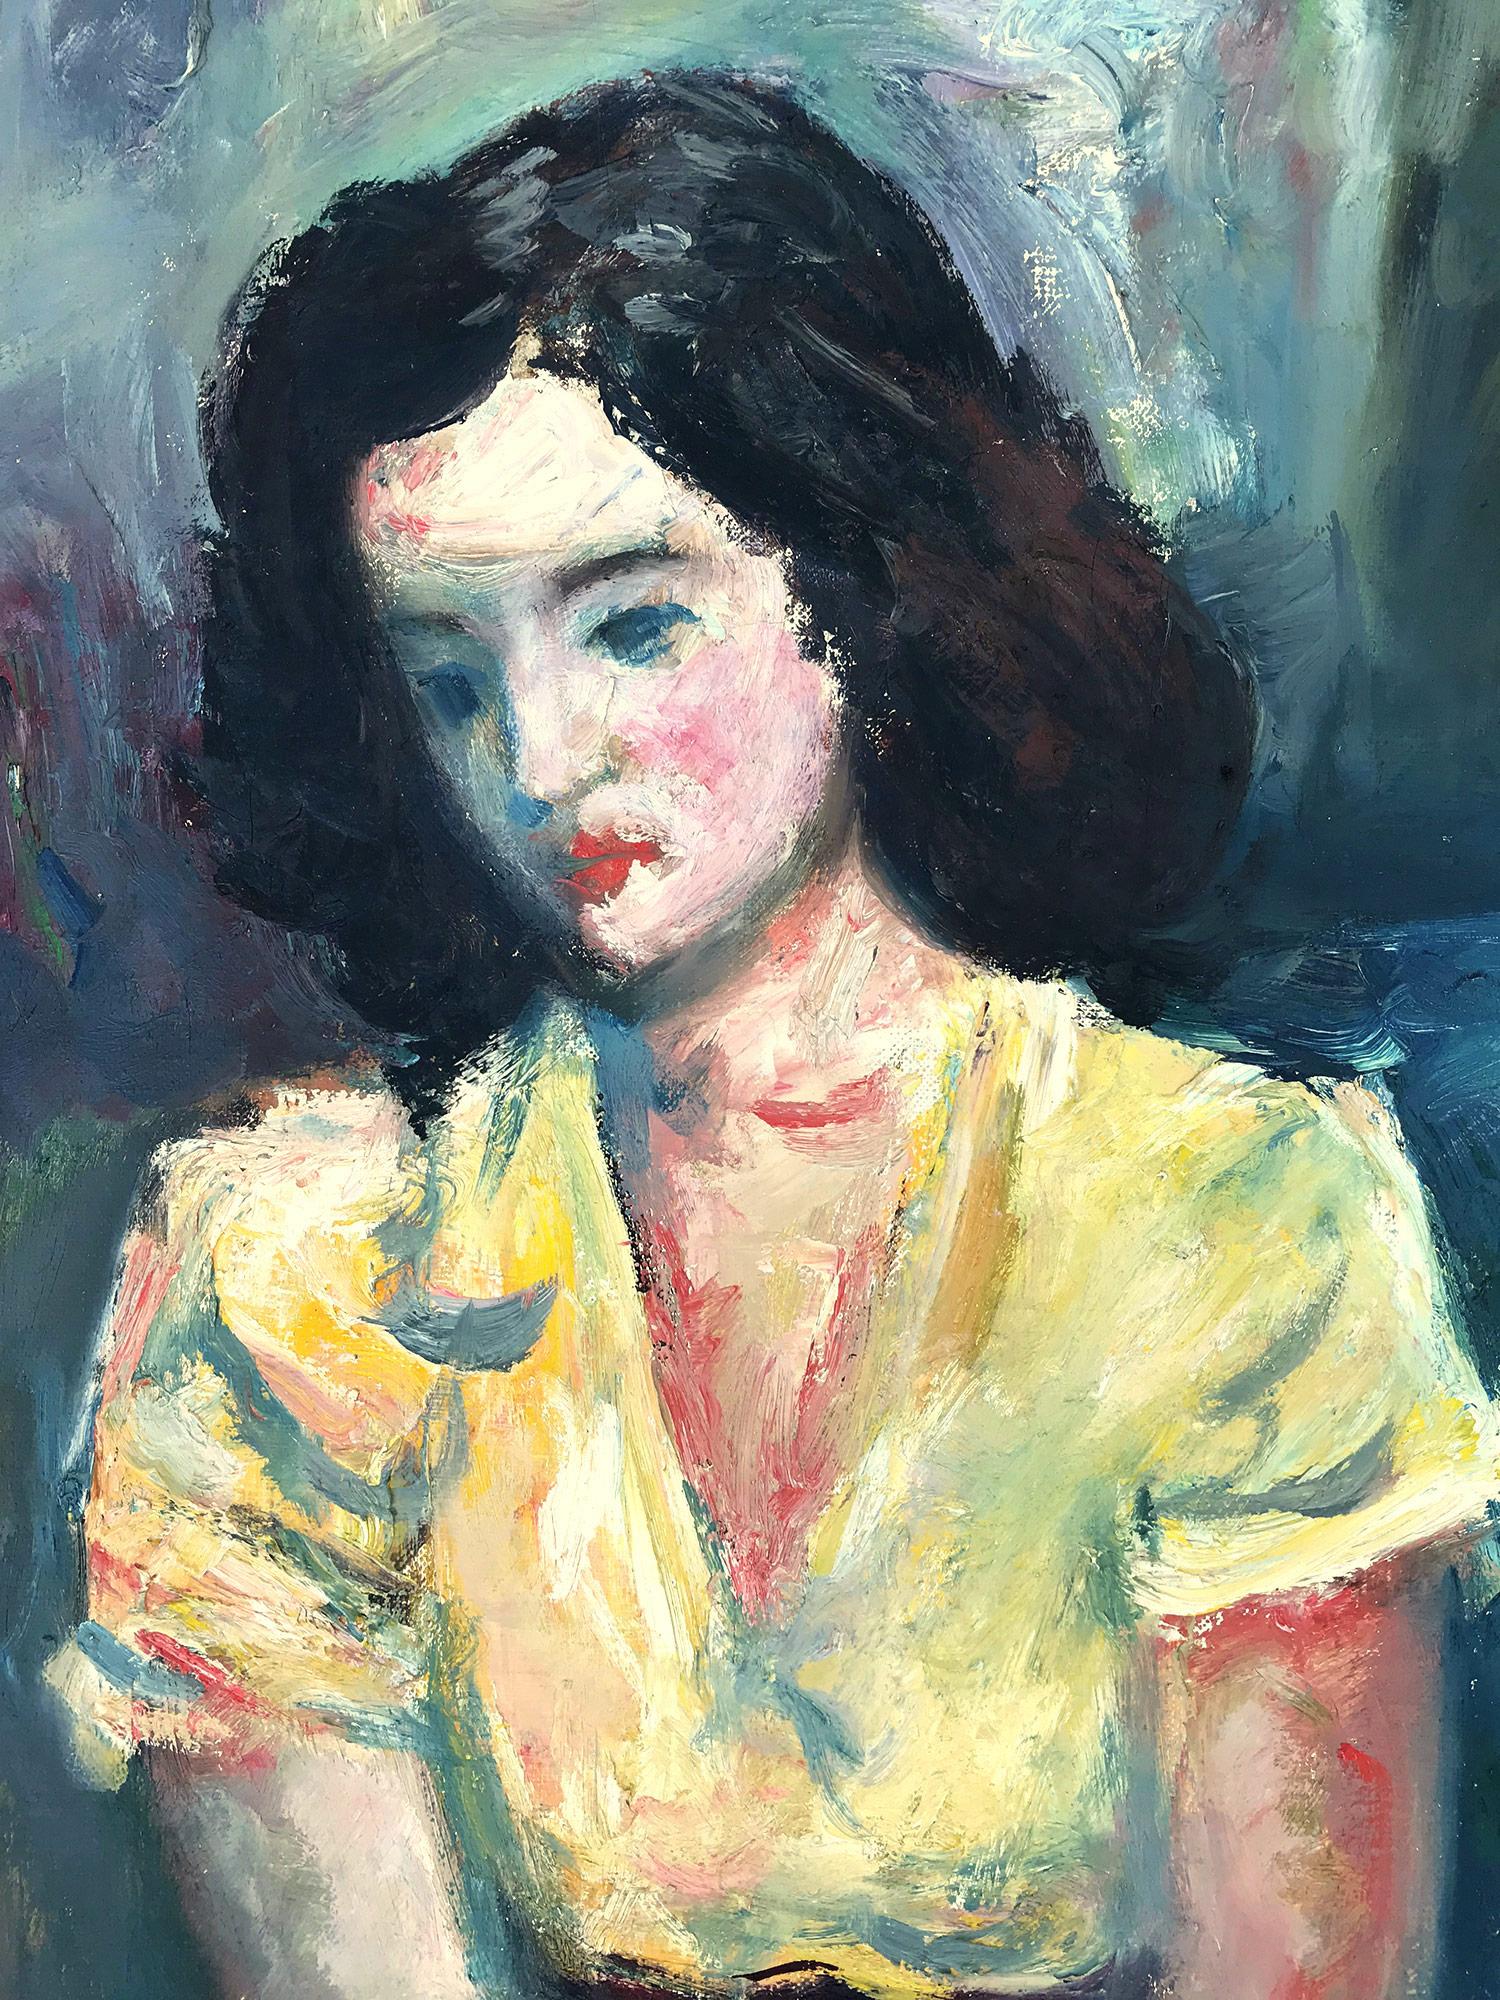 This painting depicts a whimsical portrait of a young girl posing with hands crossed in a light yellow blouse and dark black hair. The bright colors and quick brush strokes are what makes this painting so attractive and desirable. The piece is done